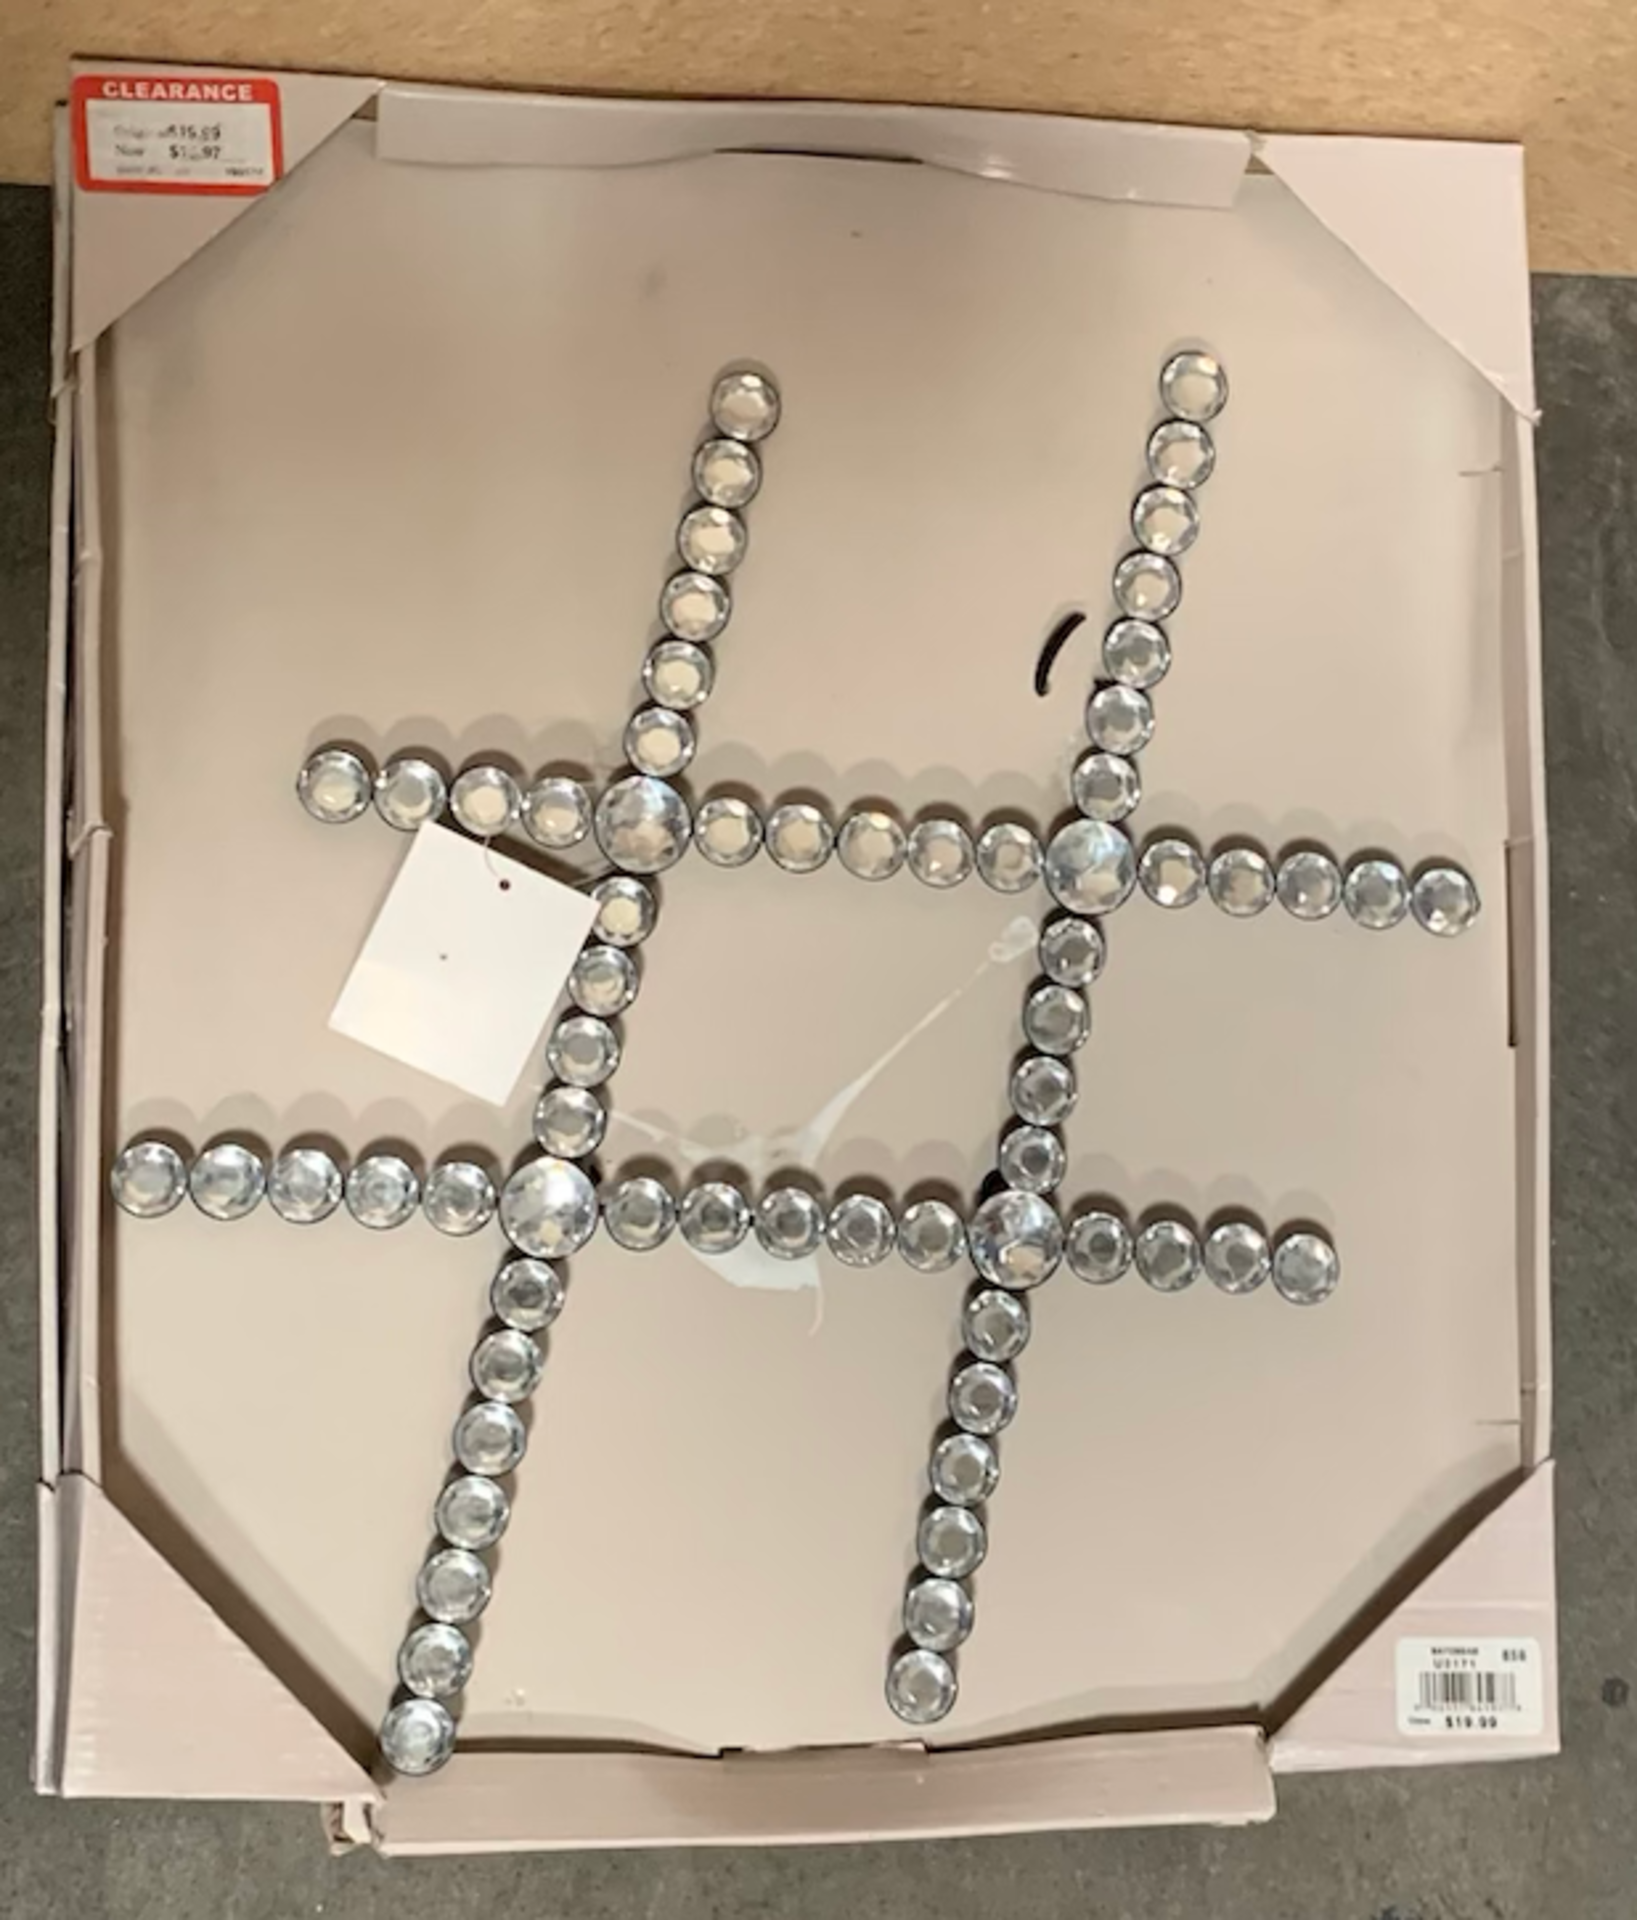 3 Crystal Decorative Wall Art Pieces in Box, Pound Sign, Home Decor, $19.99 EA Value (Total $59.97) - Image 3 of 3